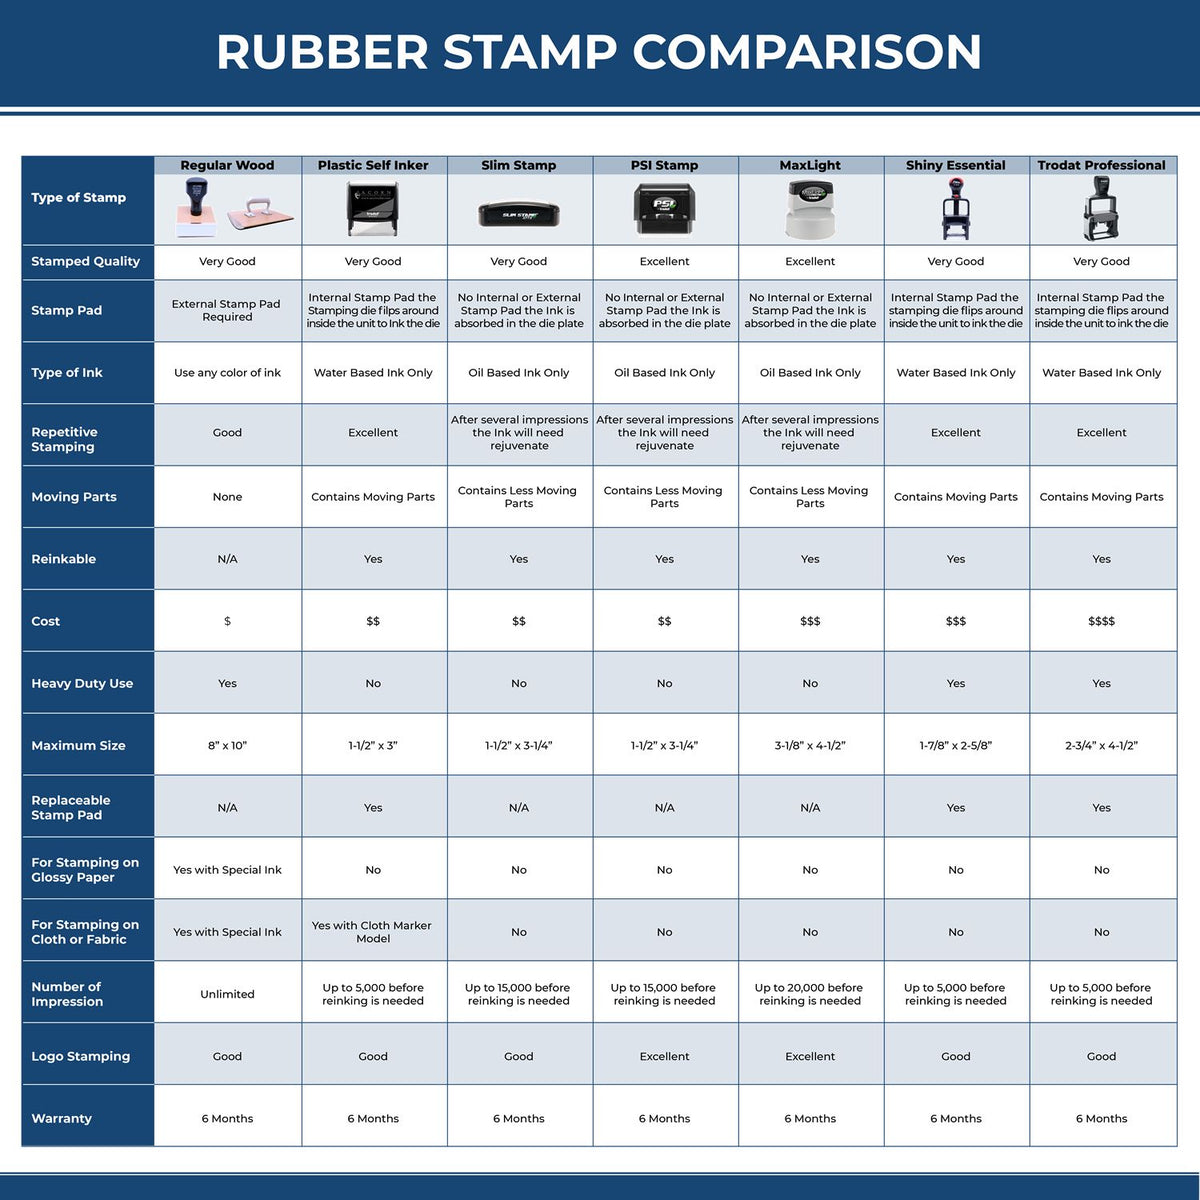 A comparison chart for the different types of mount models available for the Premium MaxLight Pre-Inked North Dakota Landscape Architectural Stamp.